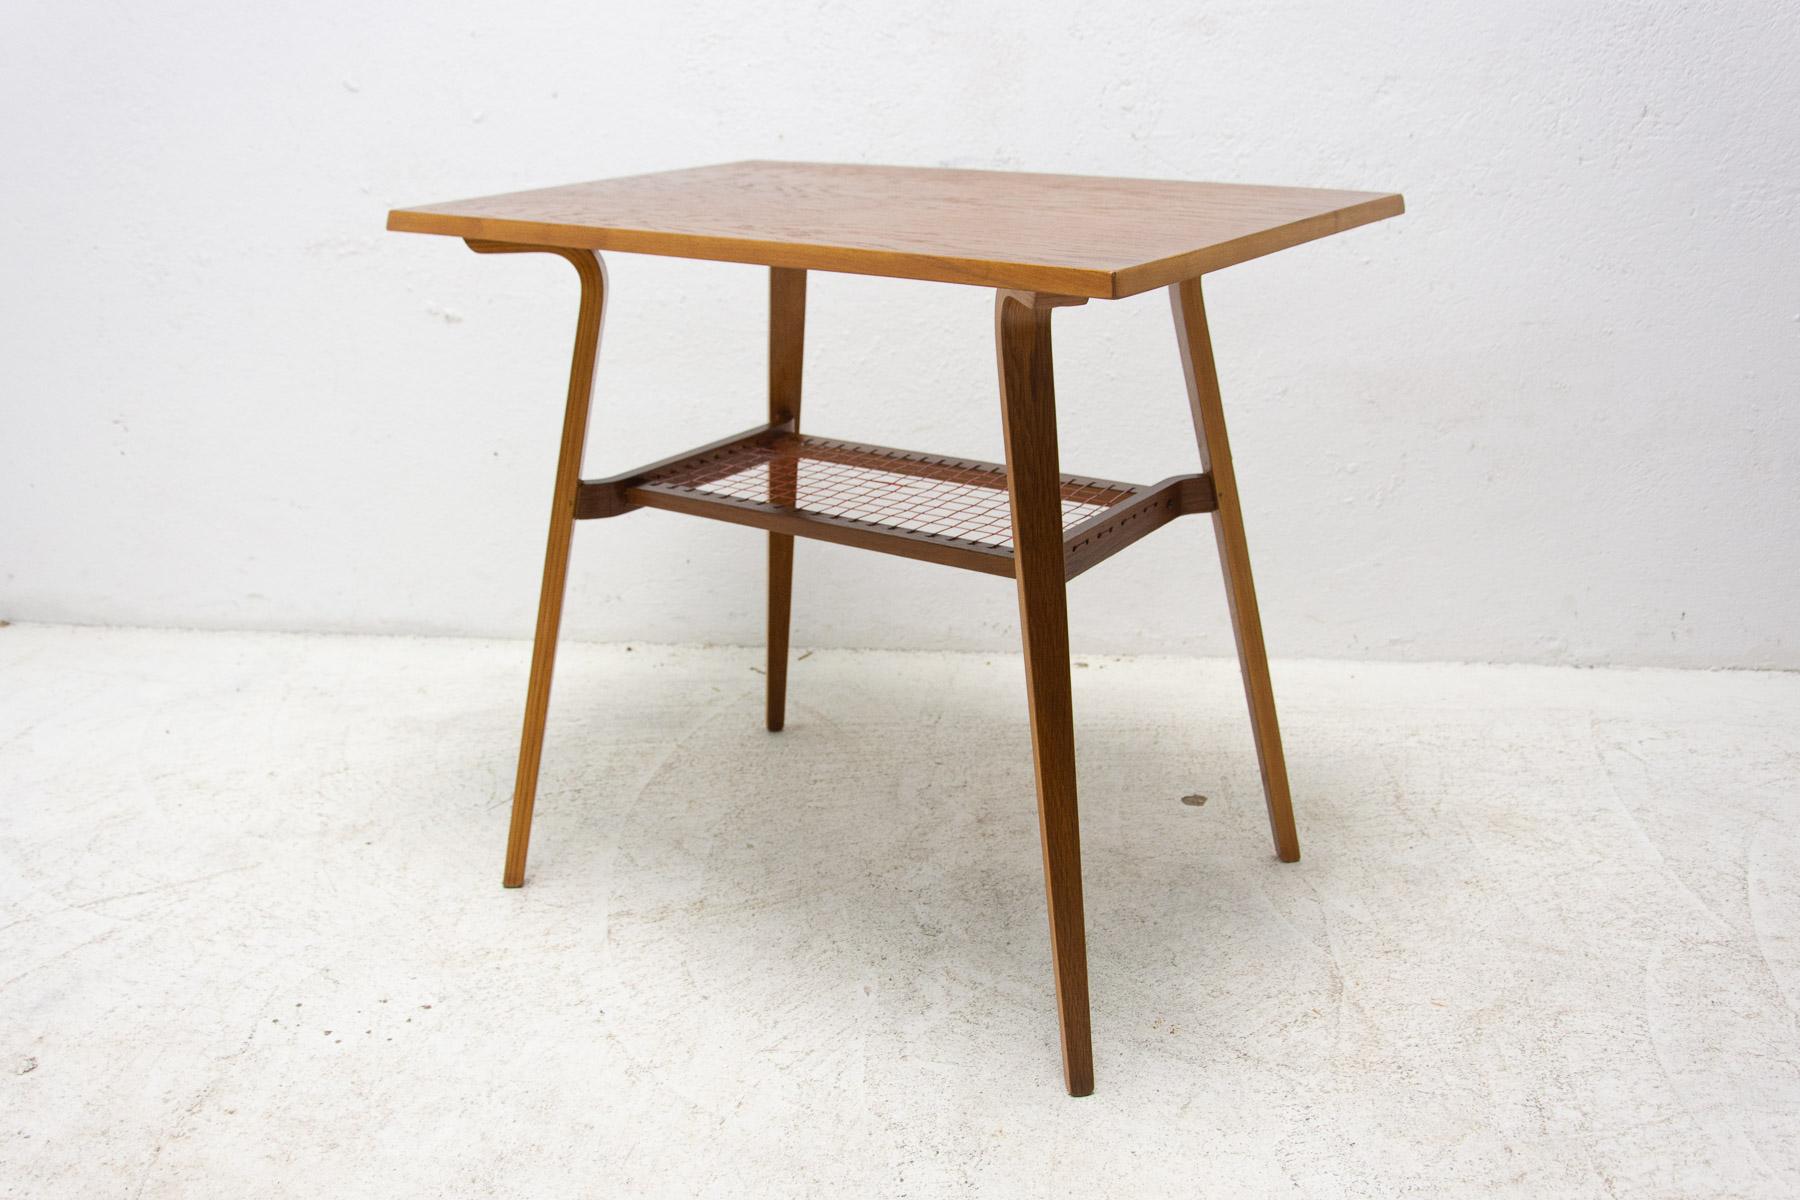 This mid century side table was made in the former Czechoslovakia in the 1970´s. It was produced by Drevopodnik Holešov company. It´s made of oak. In very good Vintage condition, shows slight signs of age and using. Associated with world-renowned